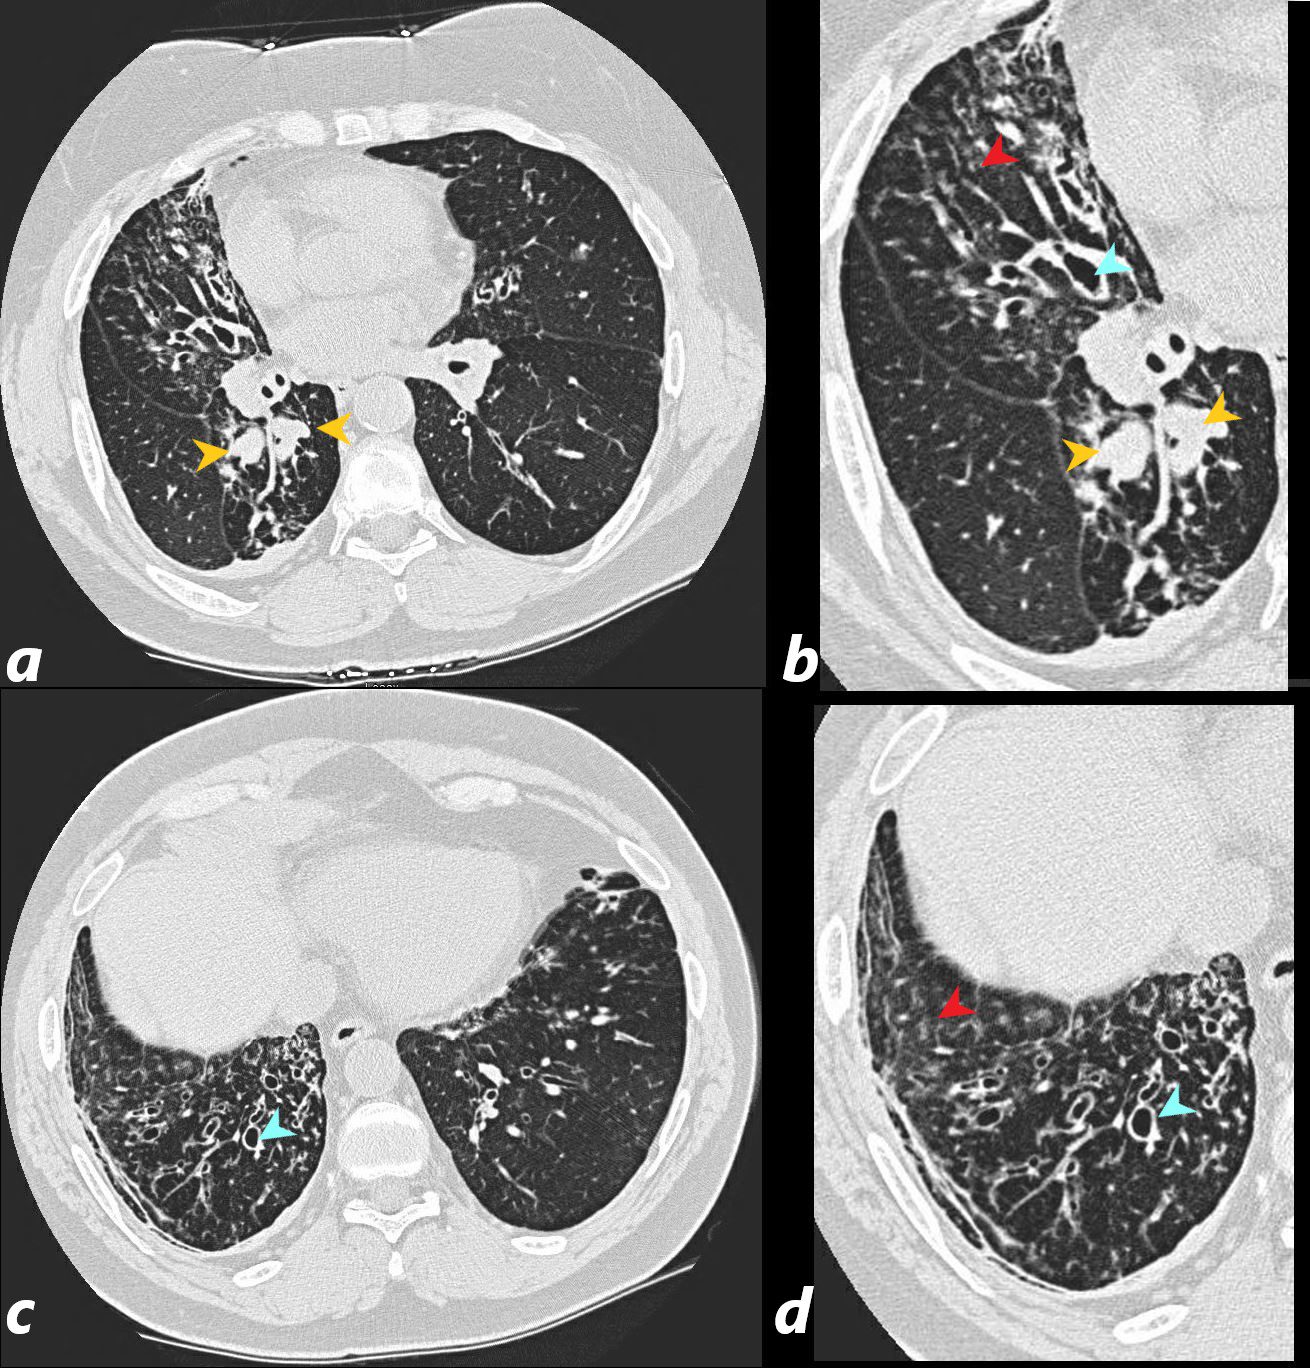 Invasive pulmonary aspergillosis 10 years post bone marrow transplantation:  a case report | Journal of Medical Case Reports | Full Text